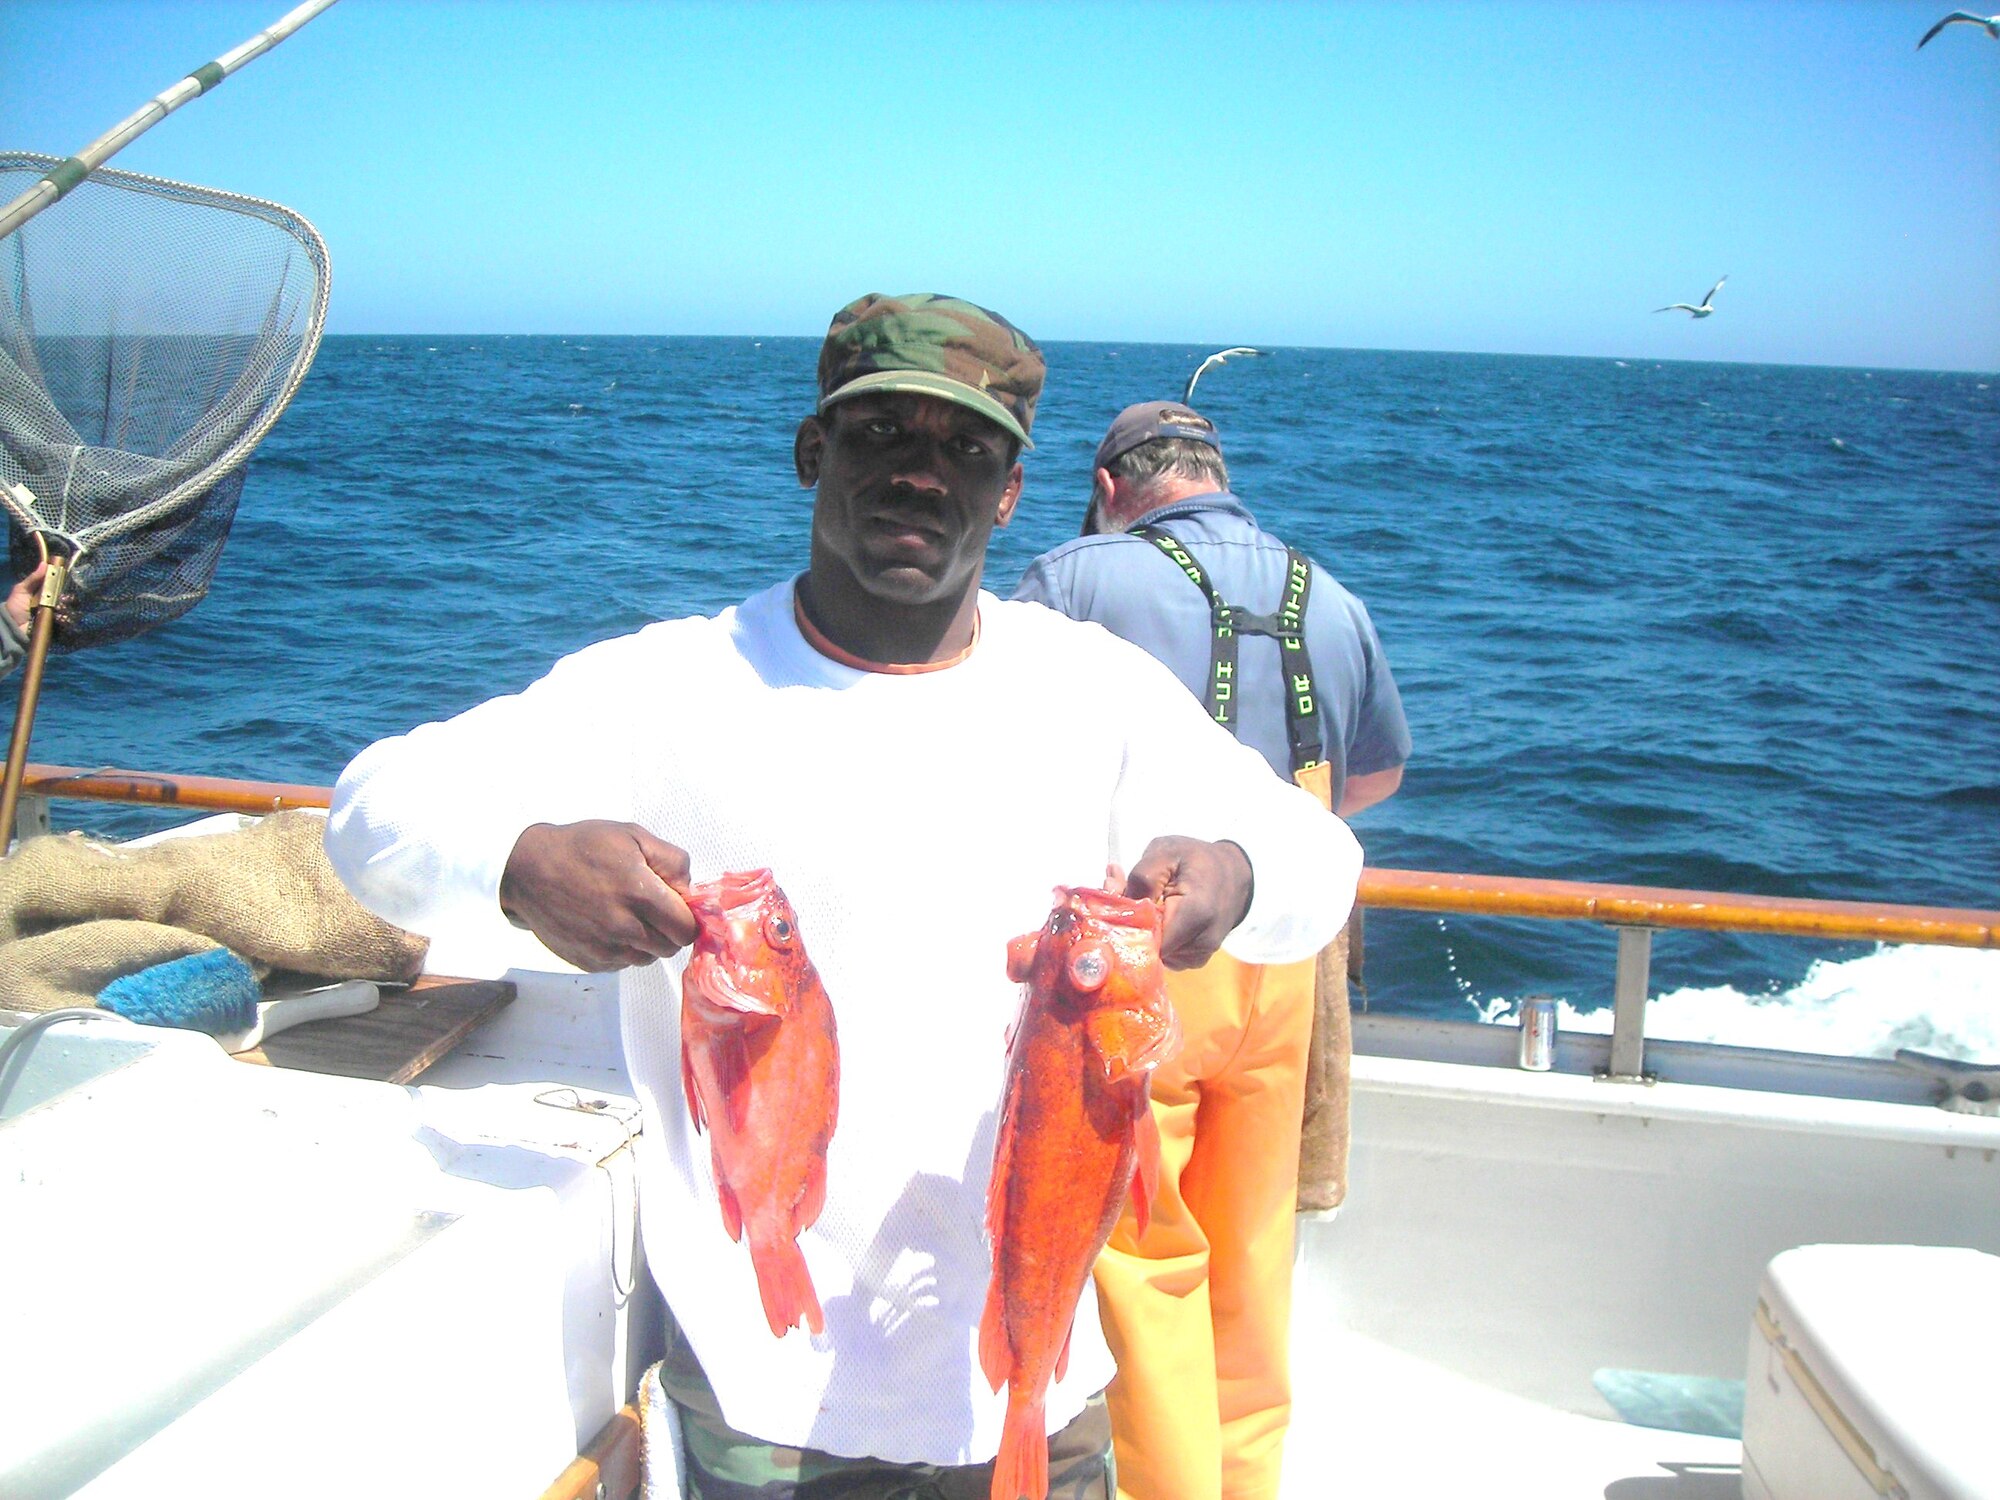 Edwards Airmen tackle awesome day of deep-sea fishing as thank-you >  Edwards Air Force Base > News